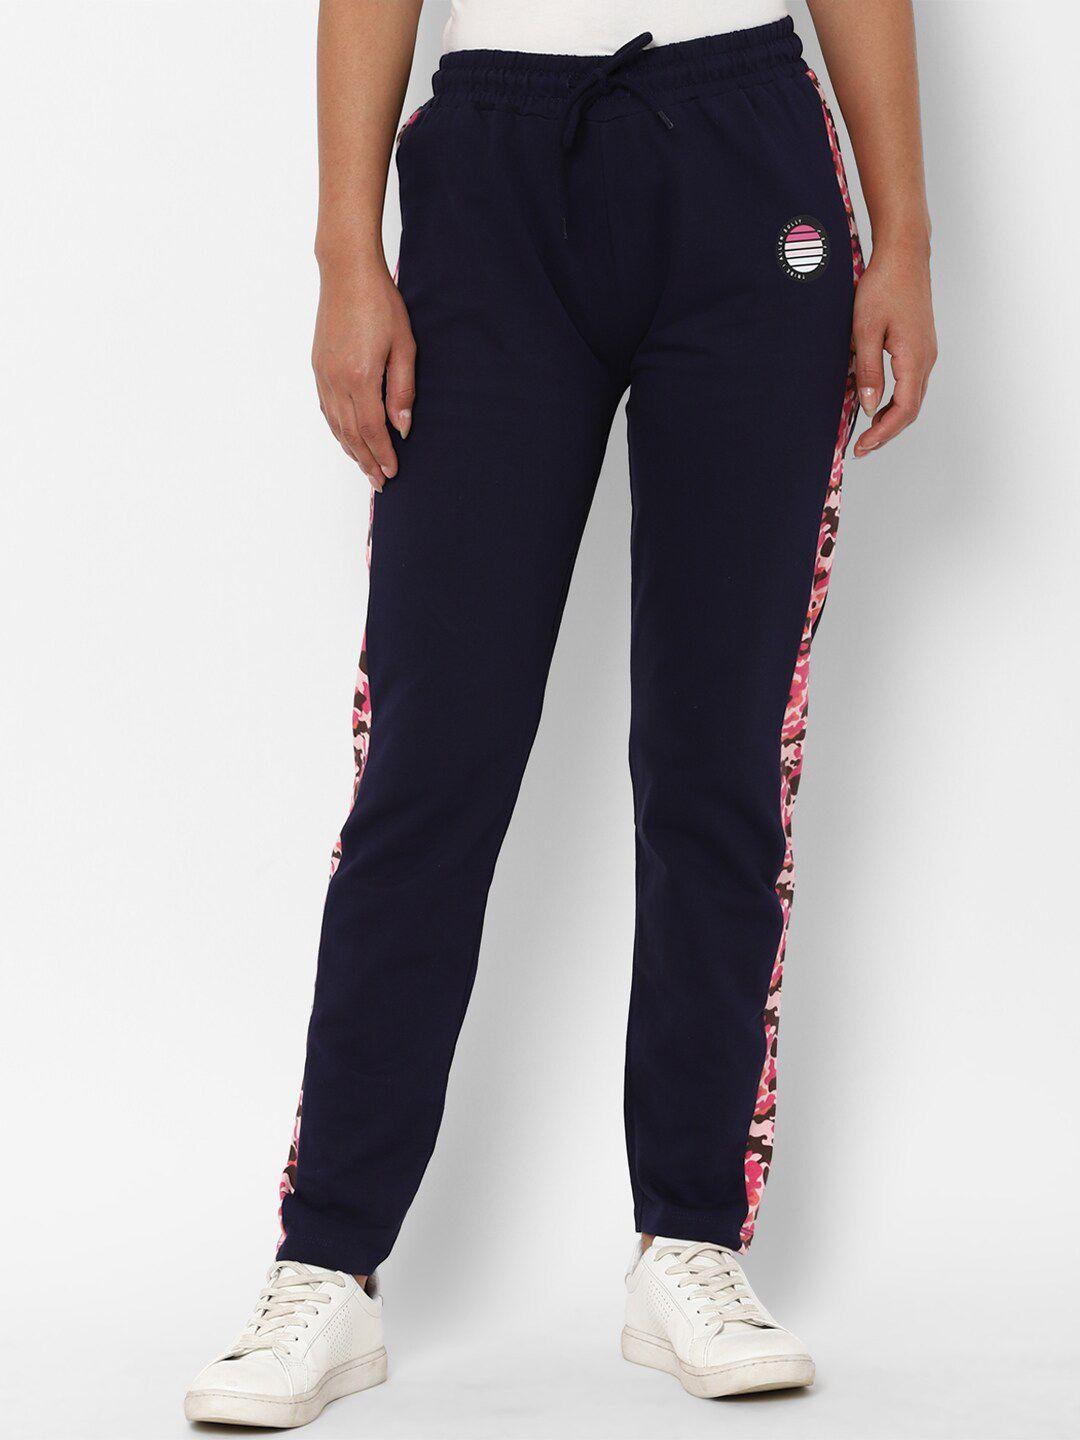 allen-solly-woman-navy-blue-printed-track-pants